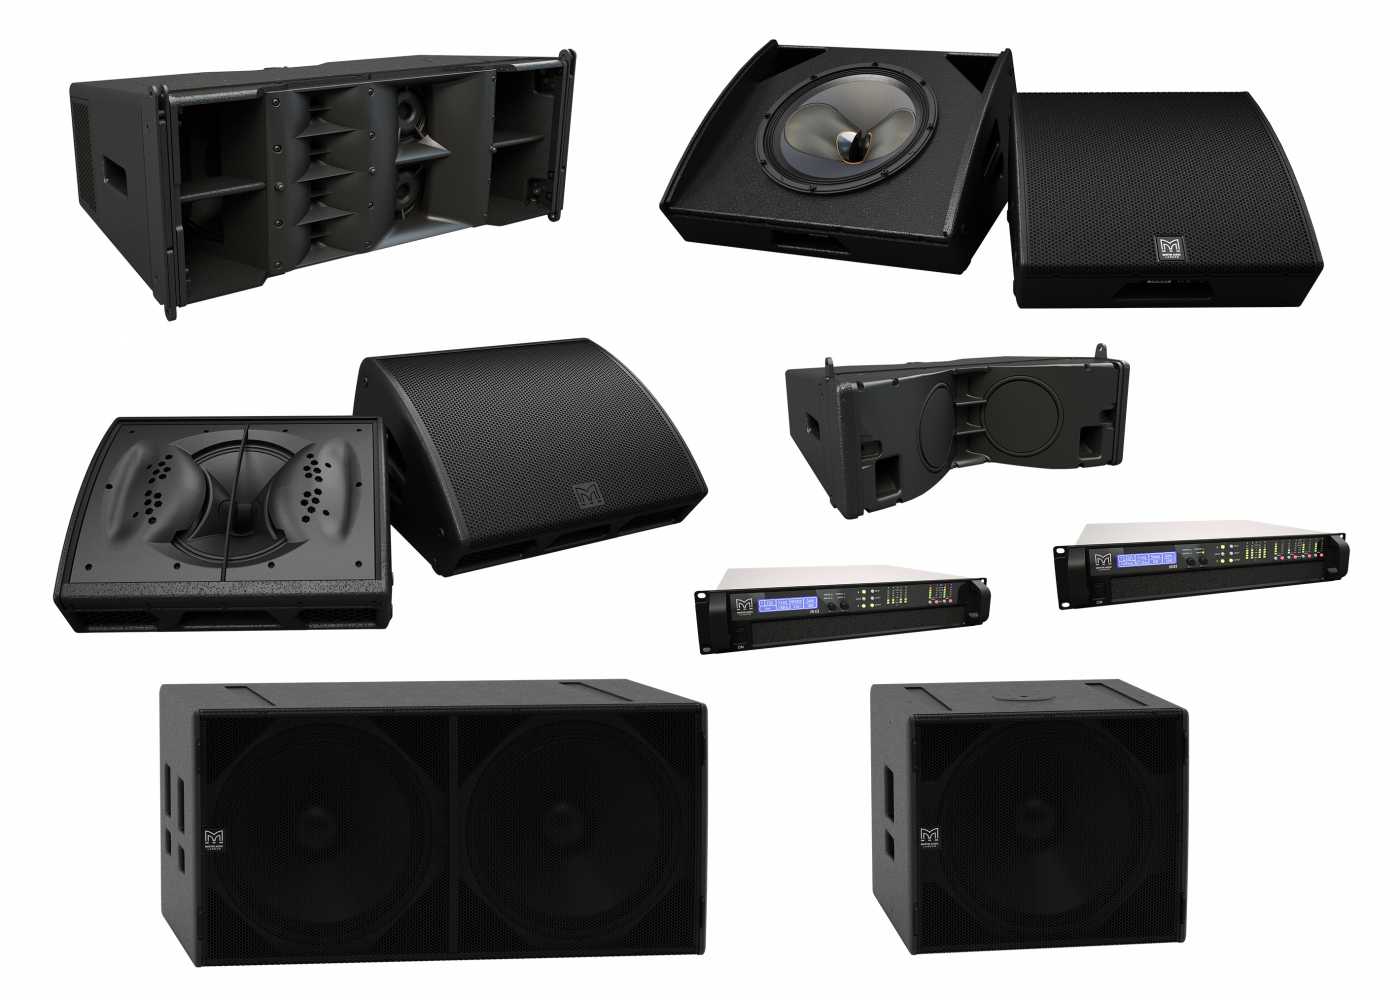 Martin Audio unveiled an ambitious line up of 10 new products across multiple categories